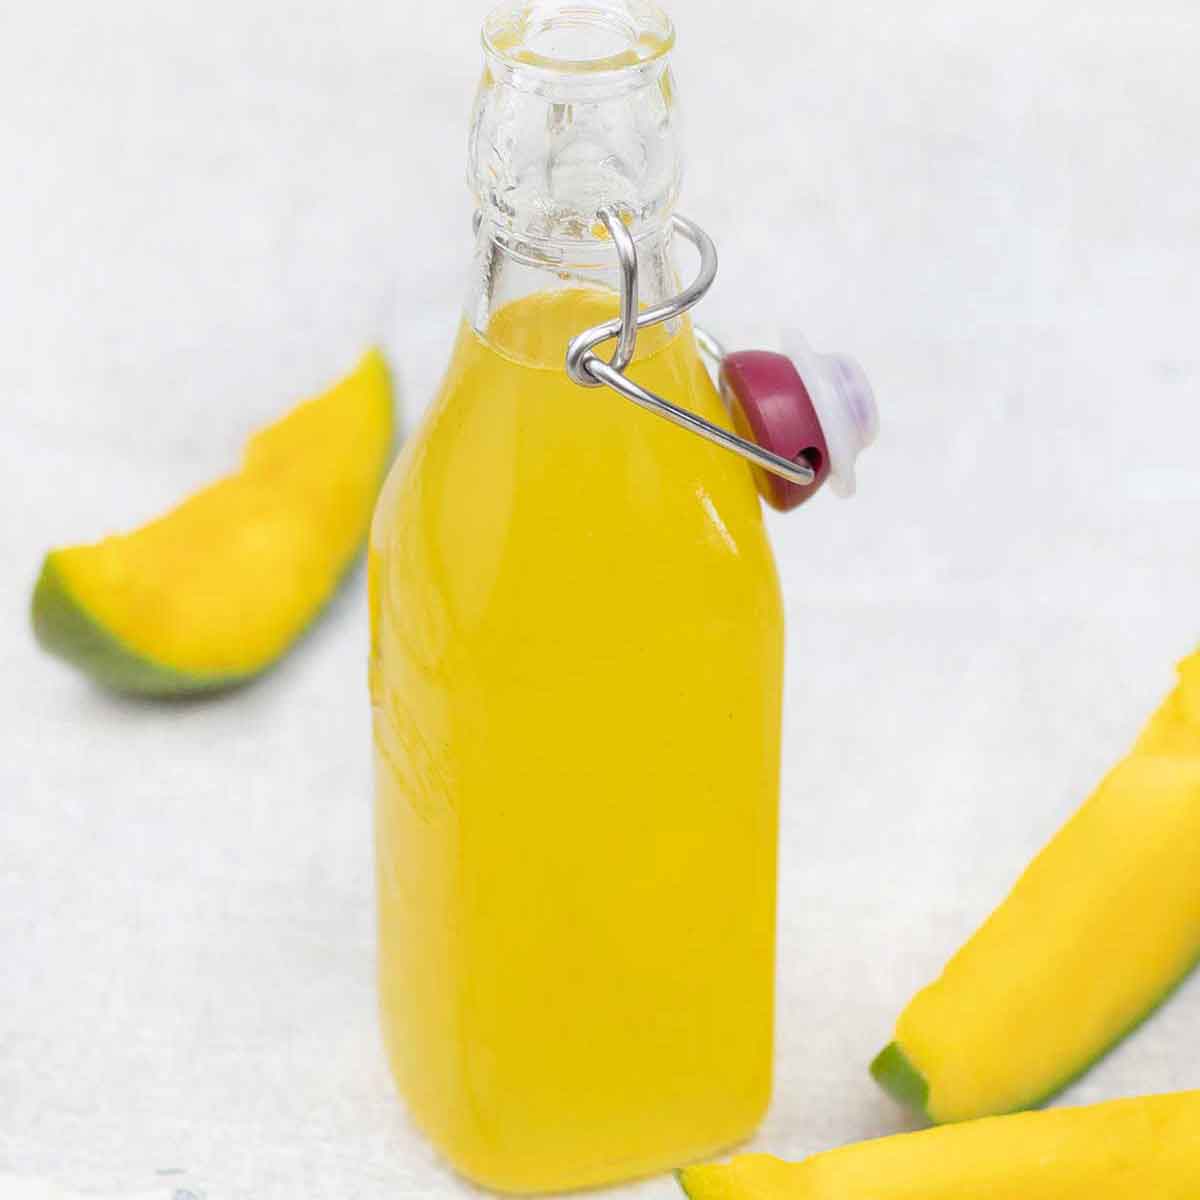 Mango syrup in a glass bottle.